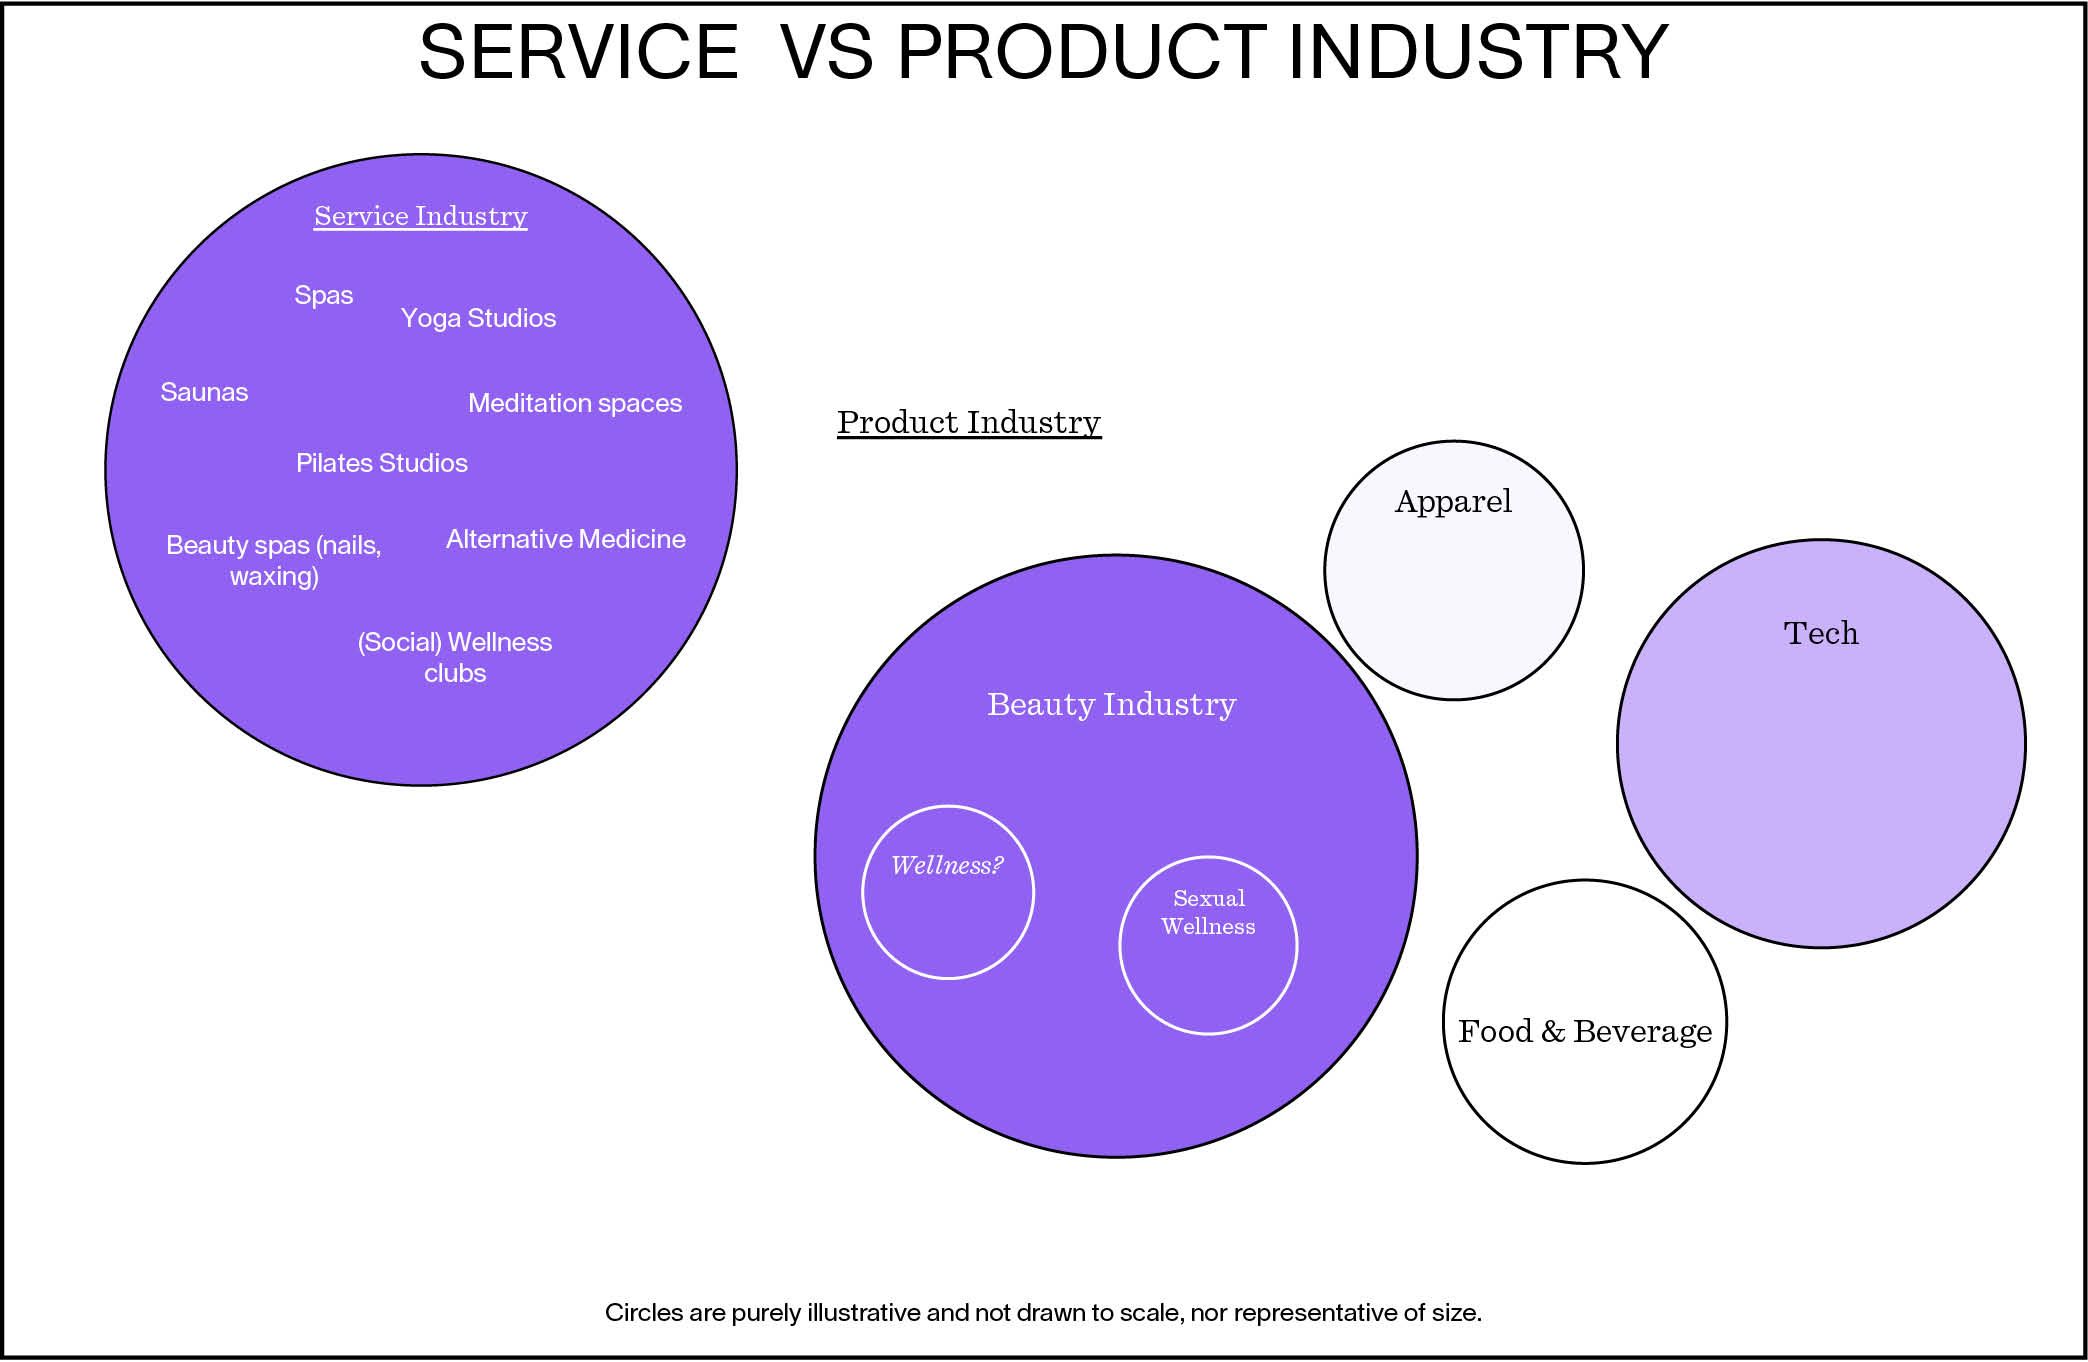 Service vs Product Industry diagram